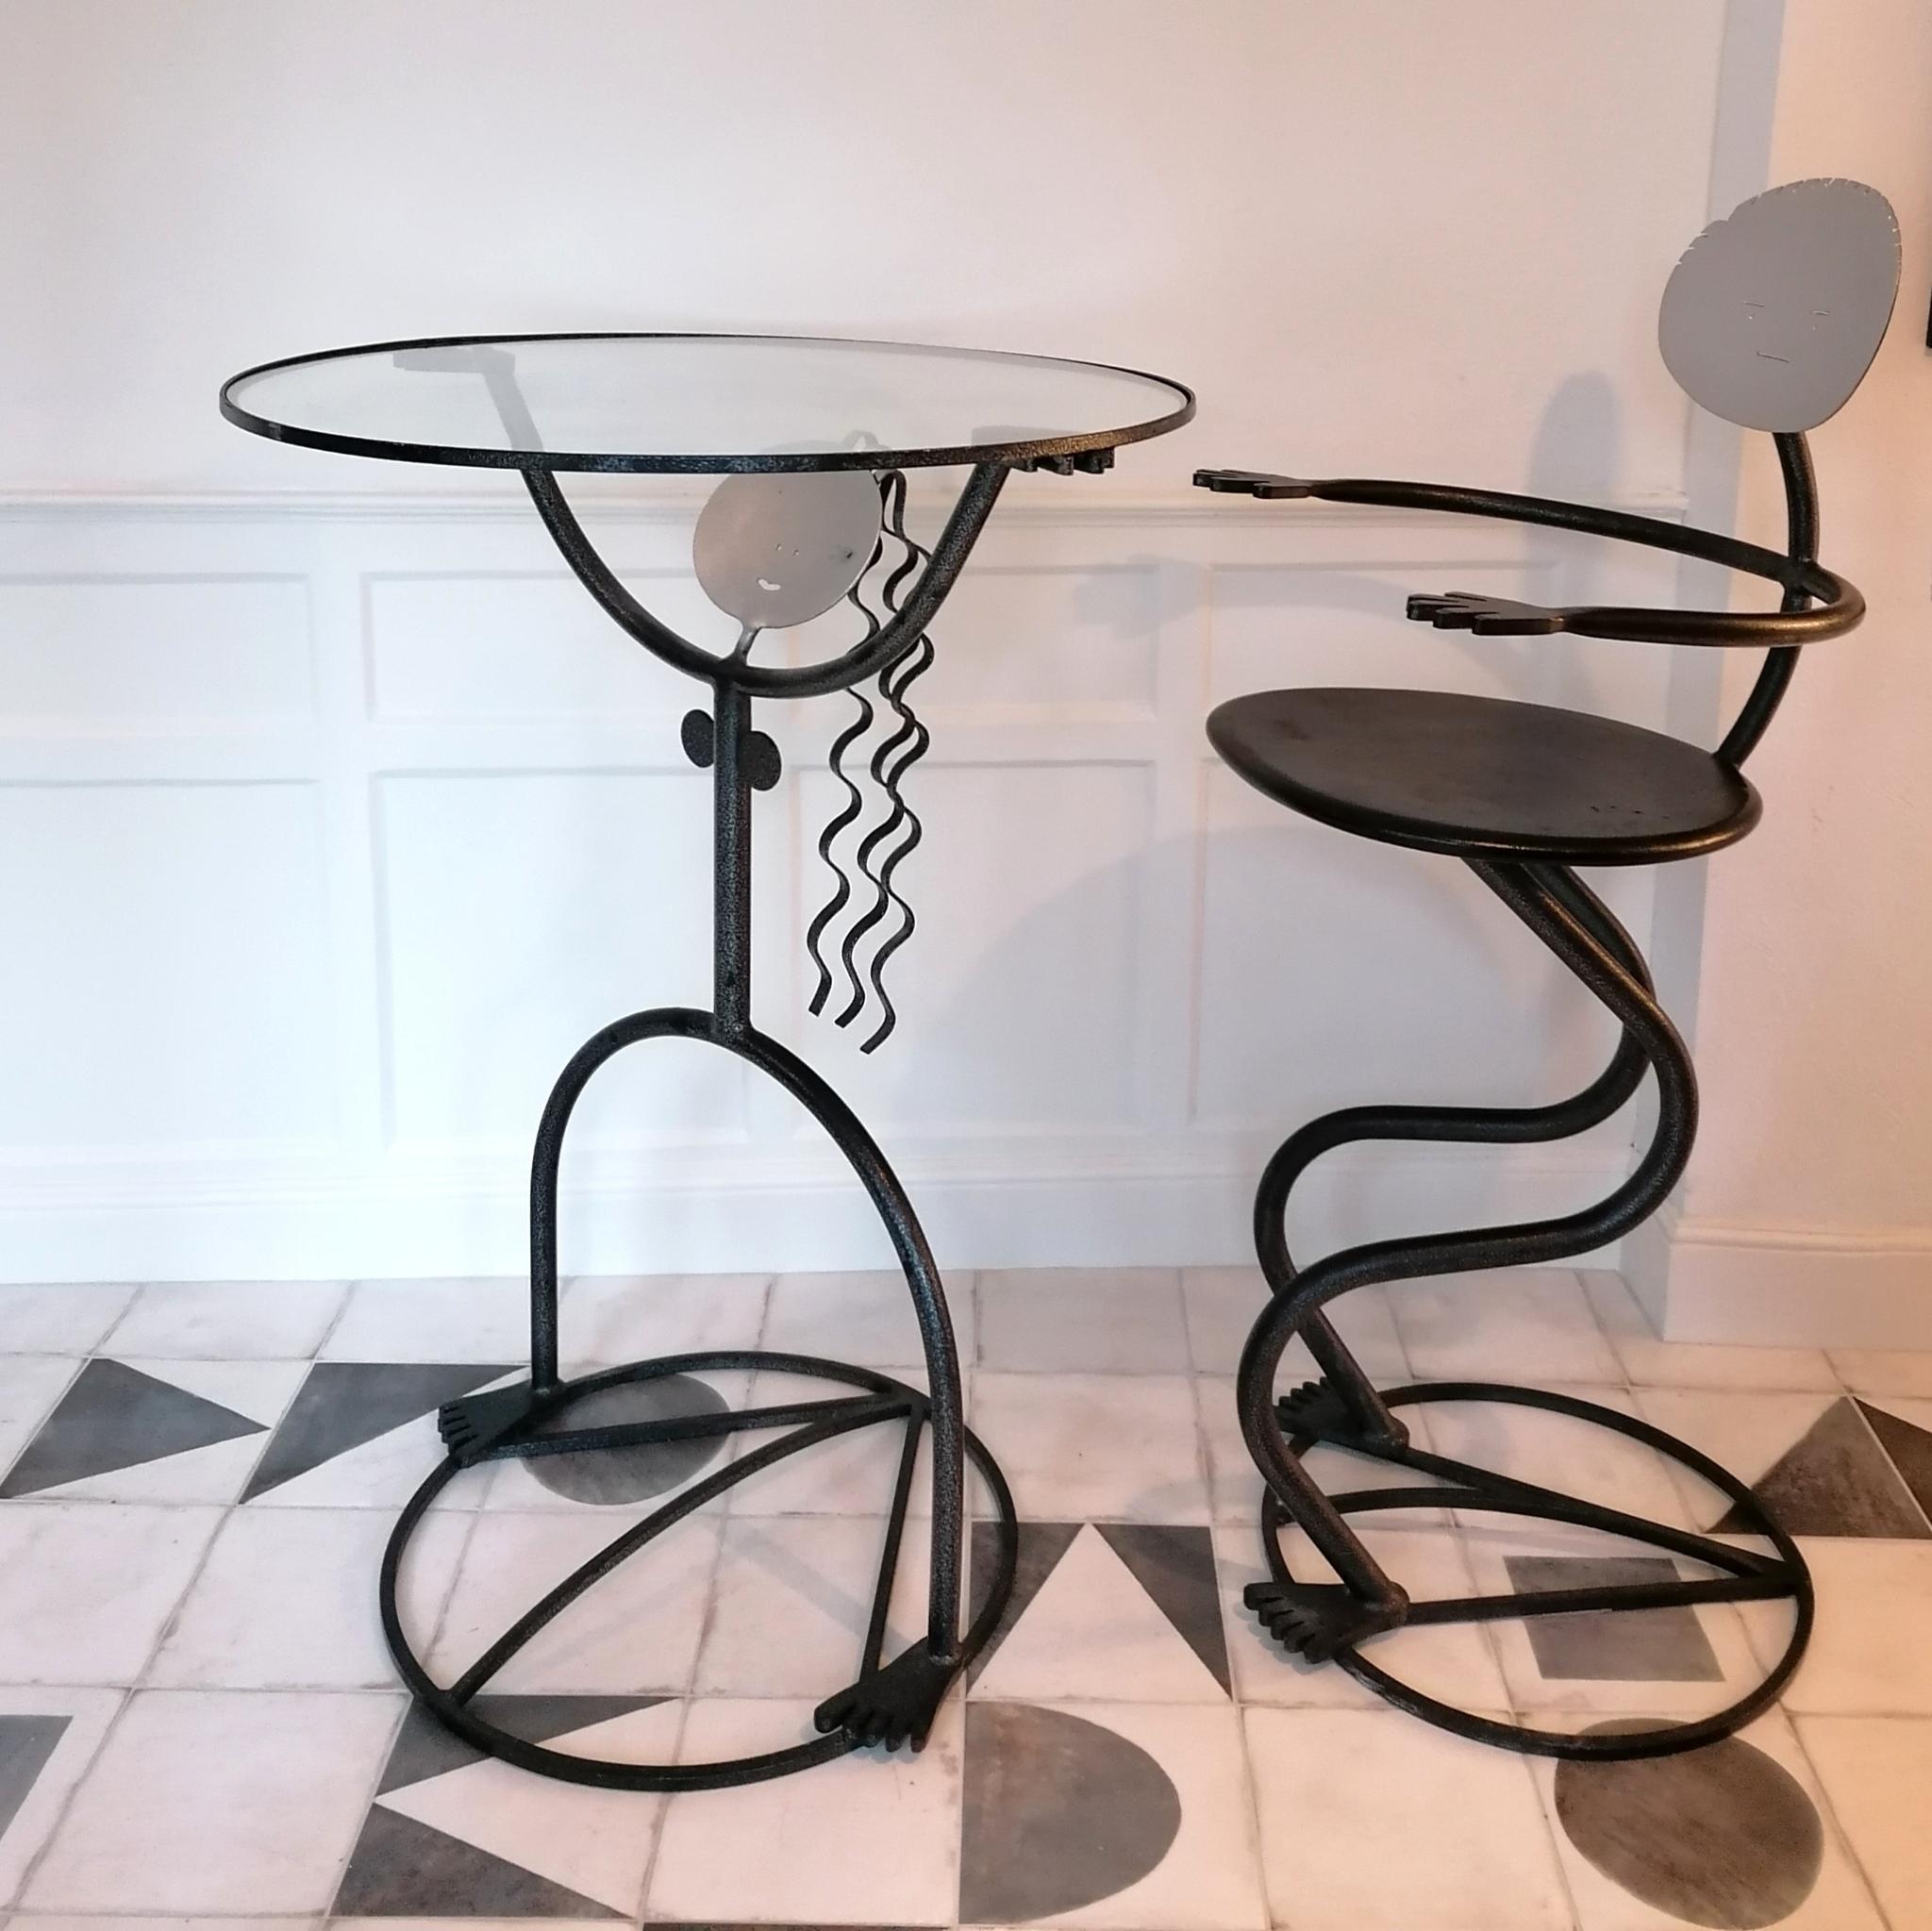 An incredible postmodern vintage American figural bar stool set with table.
Pair of swivelling bar stools- male & female- and matching bar table. Super heavy powder coated iron. Table has an inset glass top.


Dimensions:
Table- height 105cm,